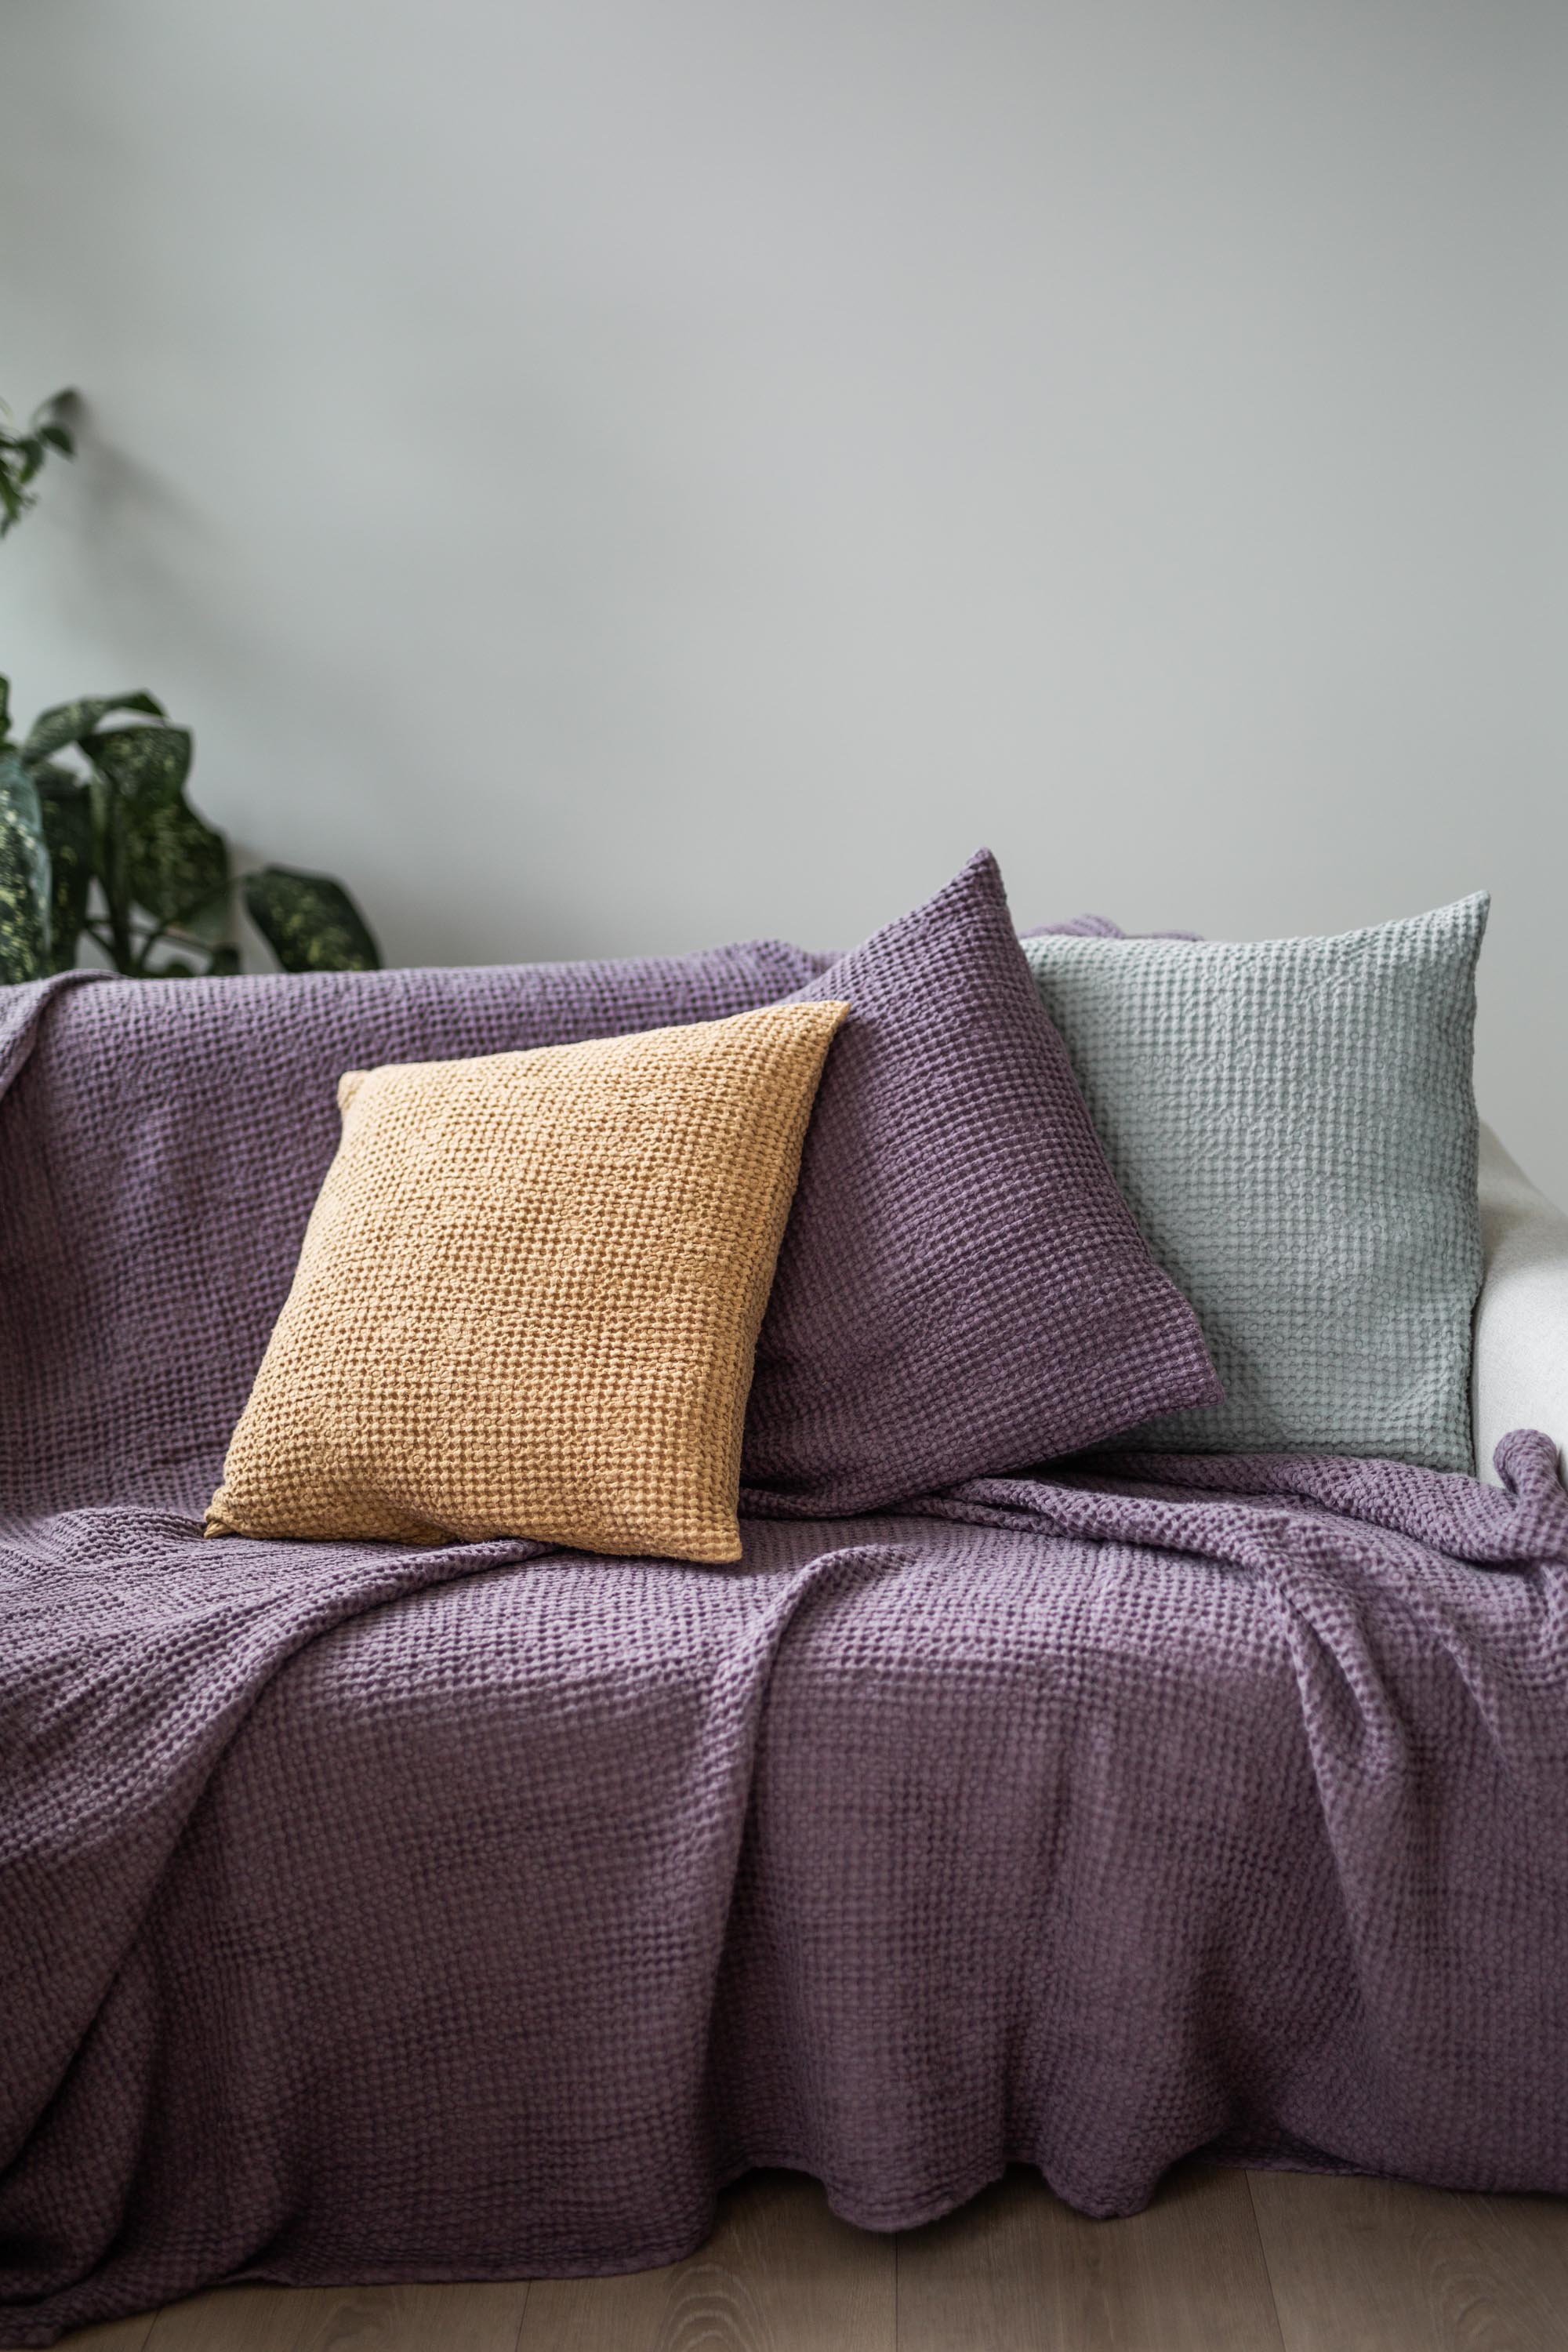 Dusty Lavender Linen Waffle Blanket On Sofa With Pillows By AmourLinen